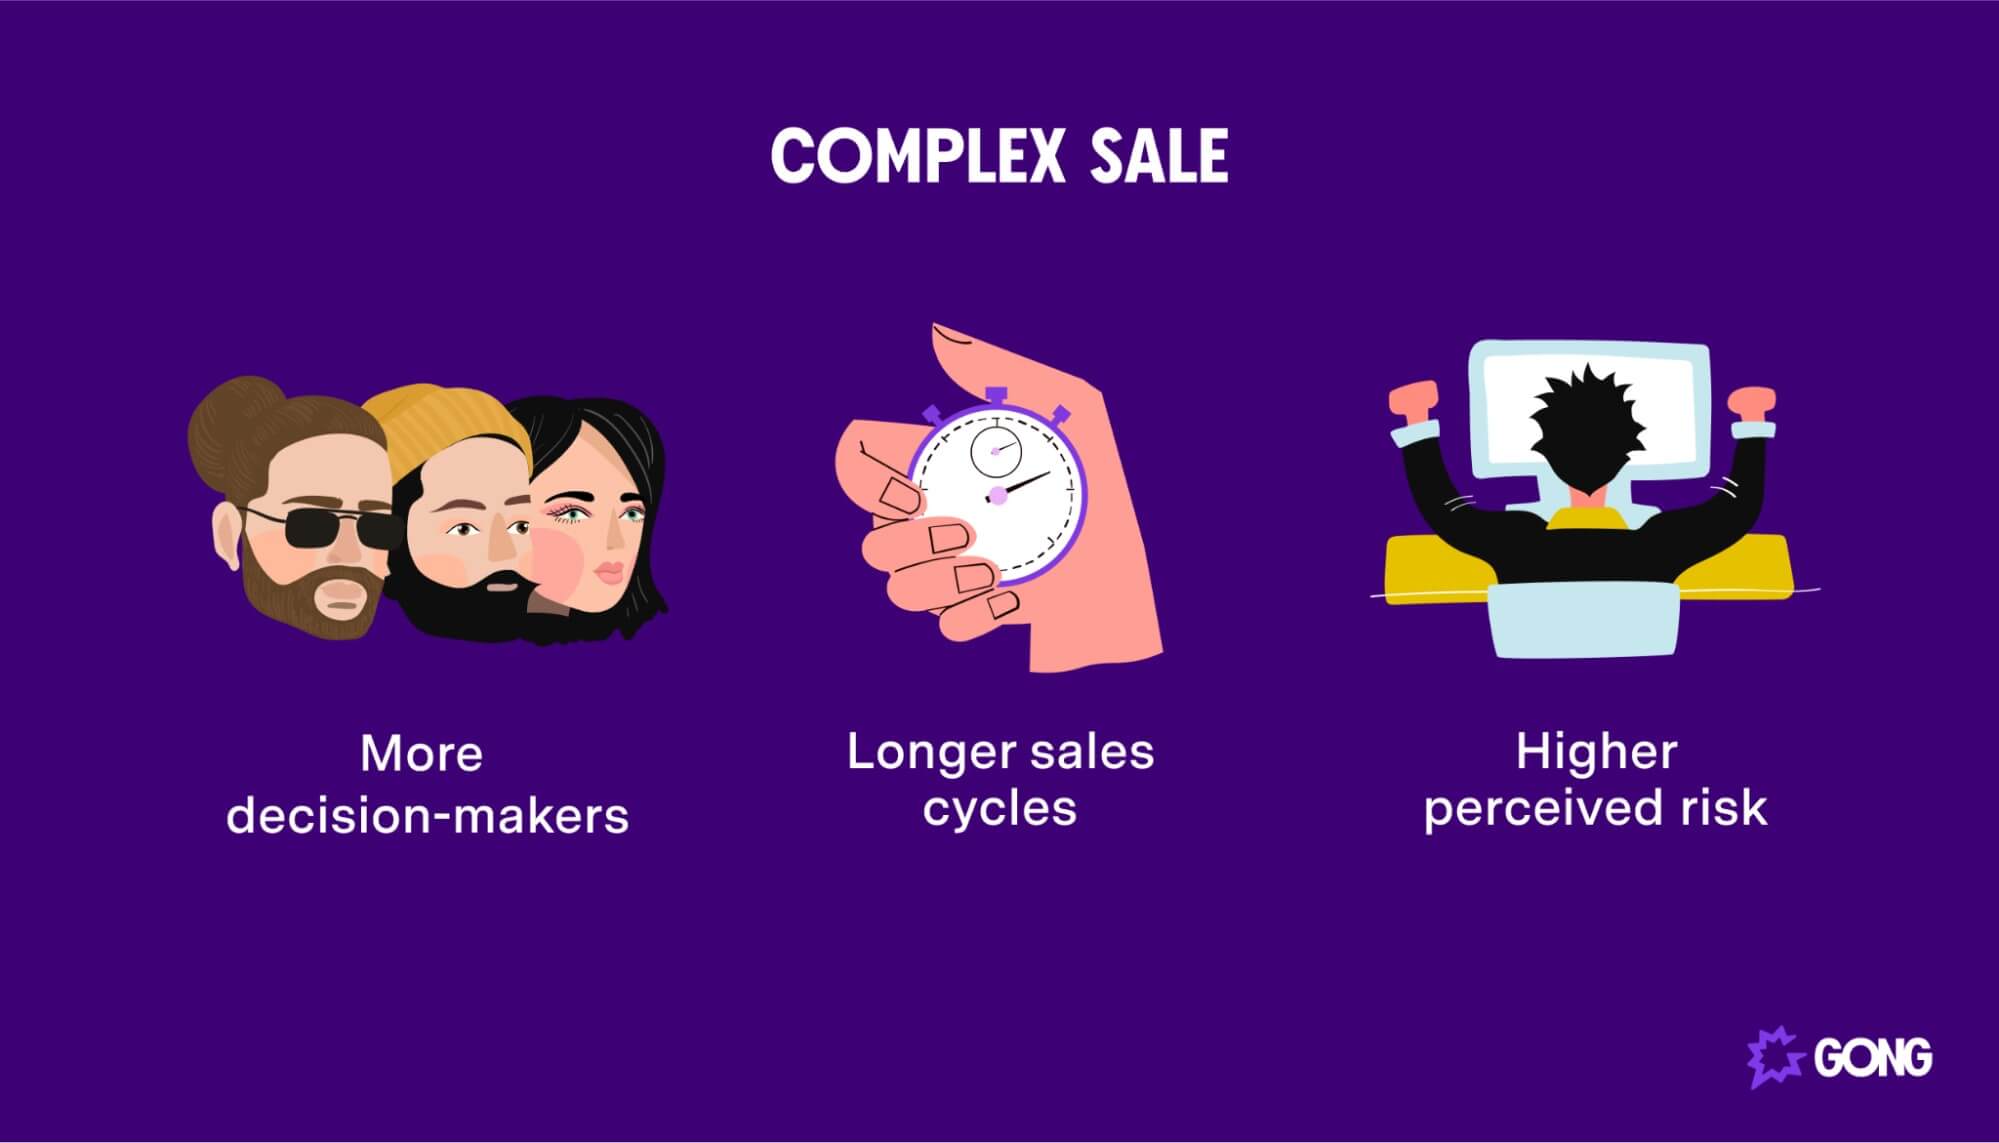 Key elements of a complex sale